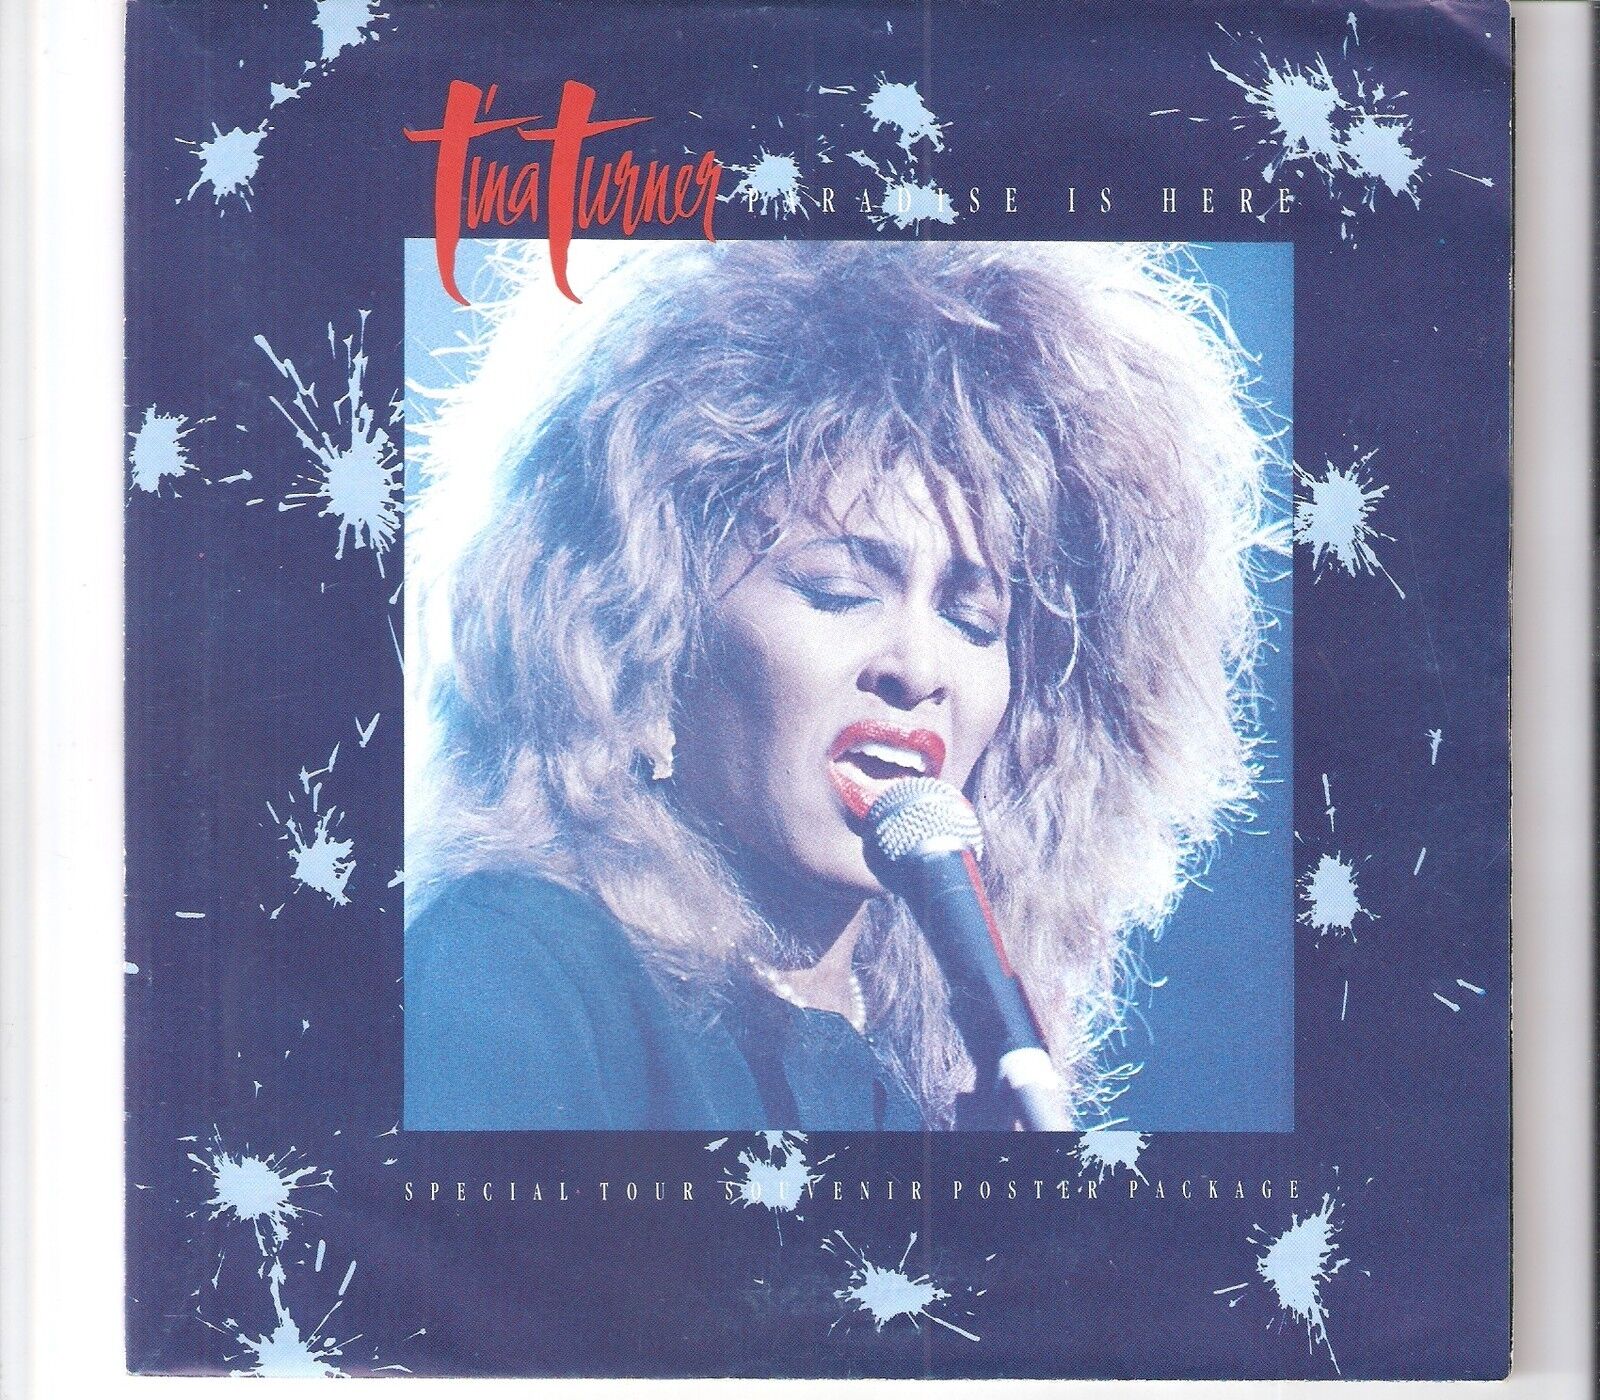 TINA TURNER - Paradise is here                         ***Tournee Postercover***